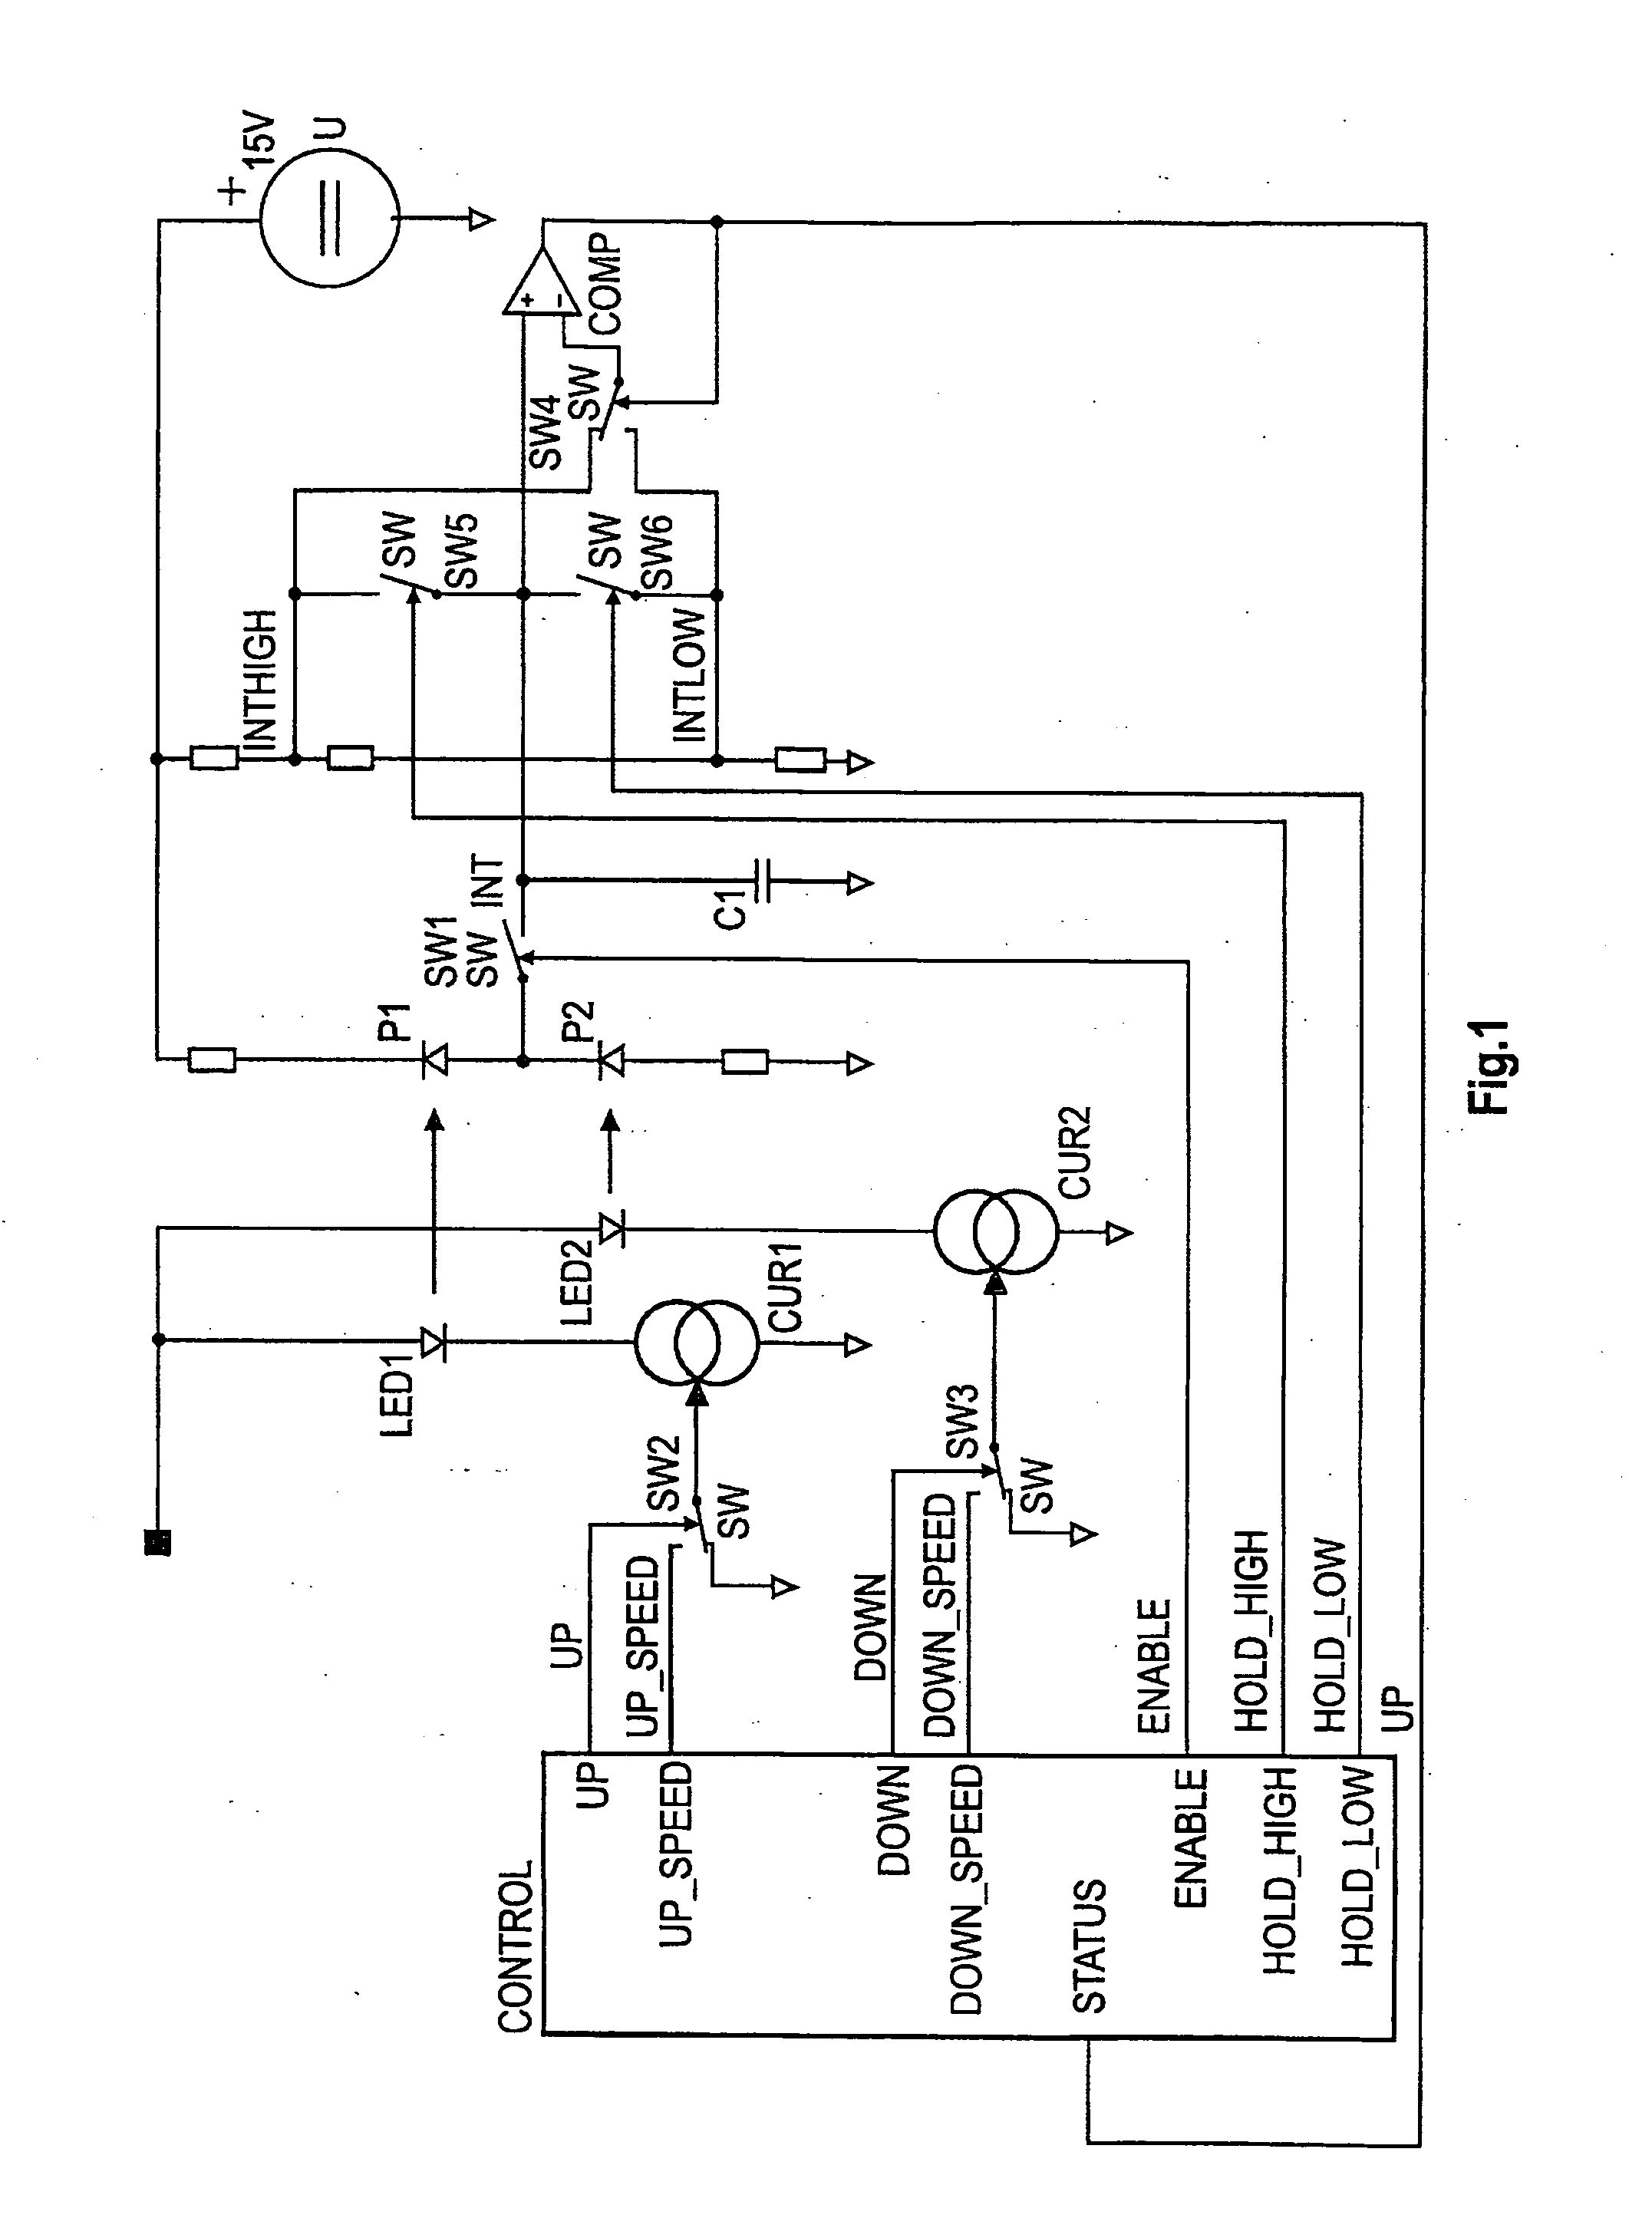 Method and sensor for detecting occurrences of wetting on a pane